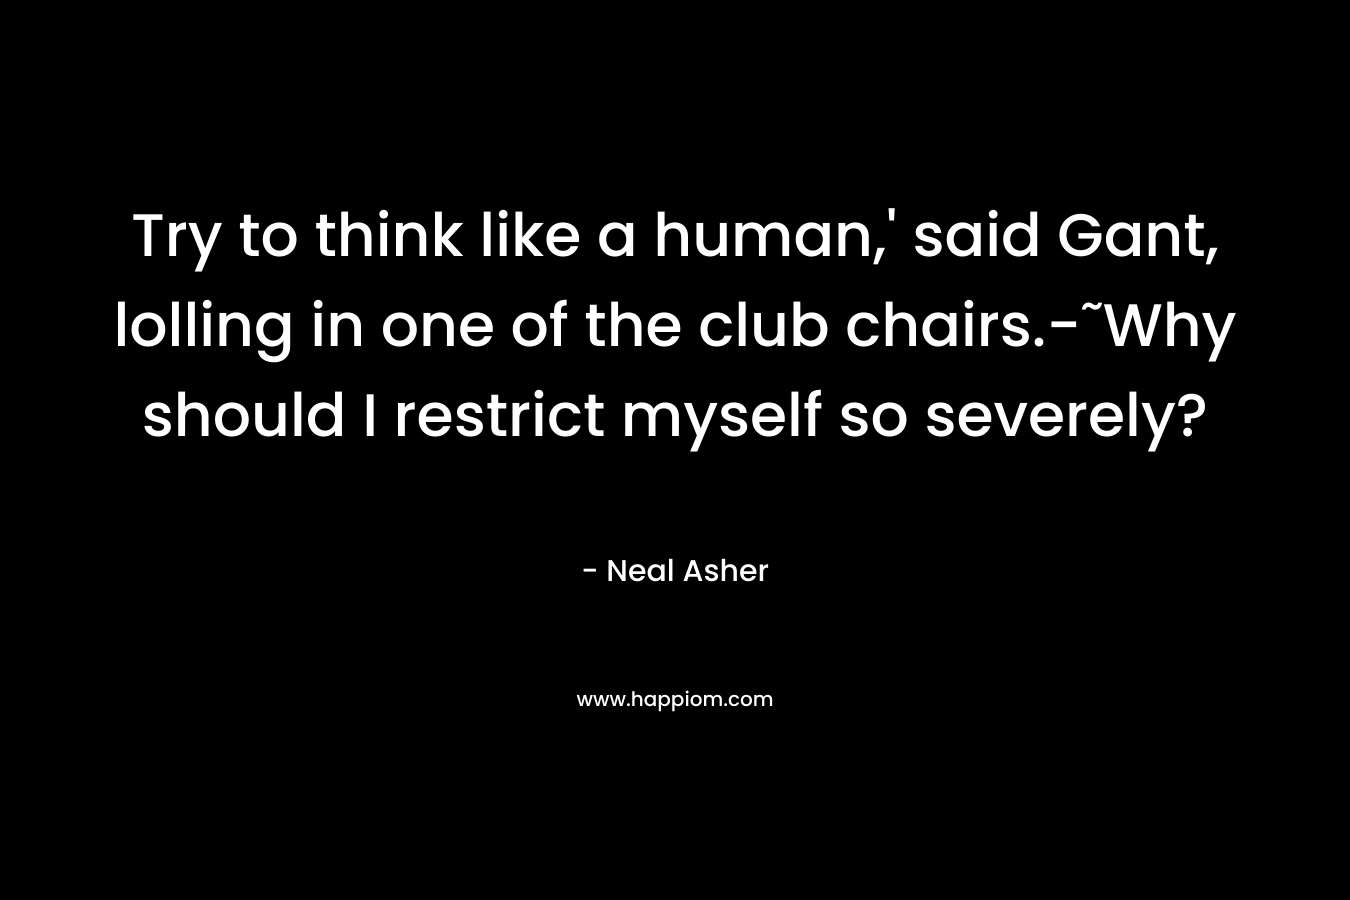 Try to think like a human,' said Gant, lolling in one of the club chairs.-˜Why should I restrict myself so severely?